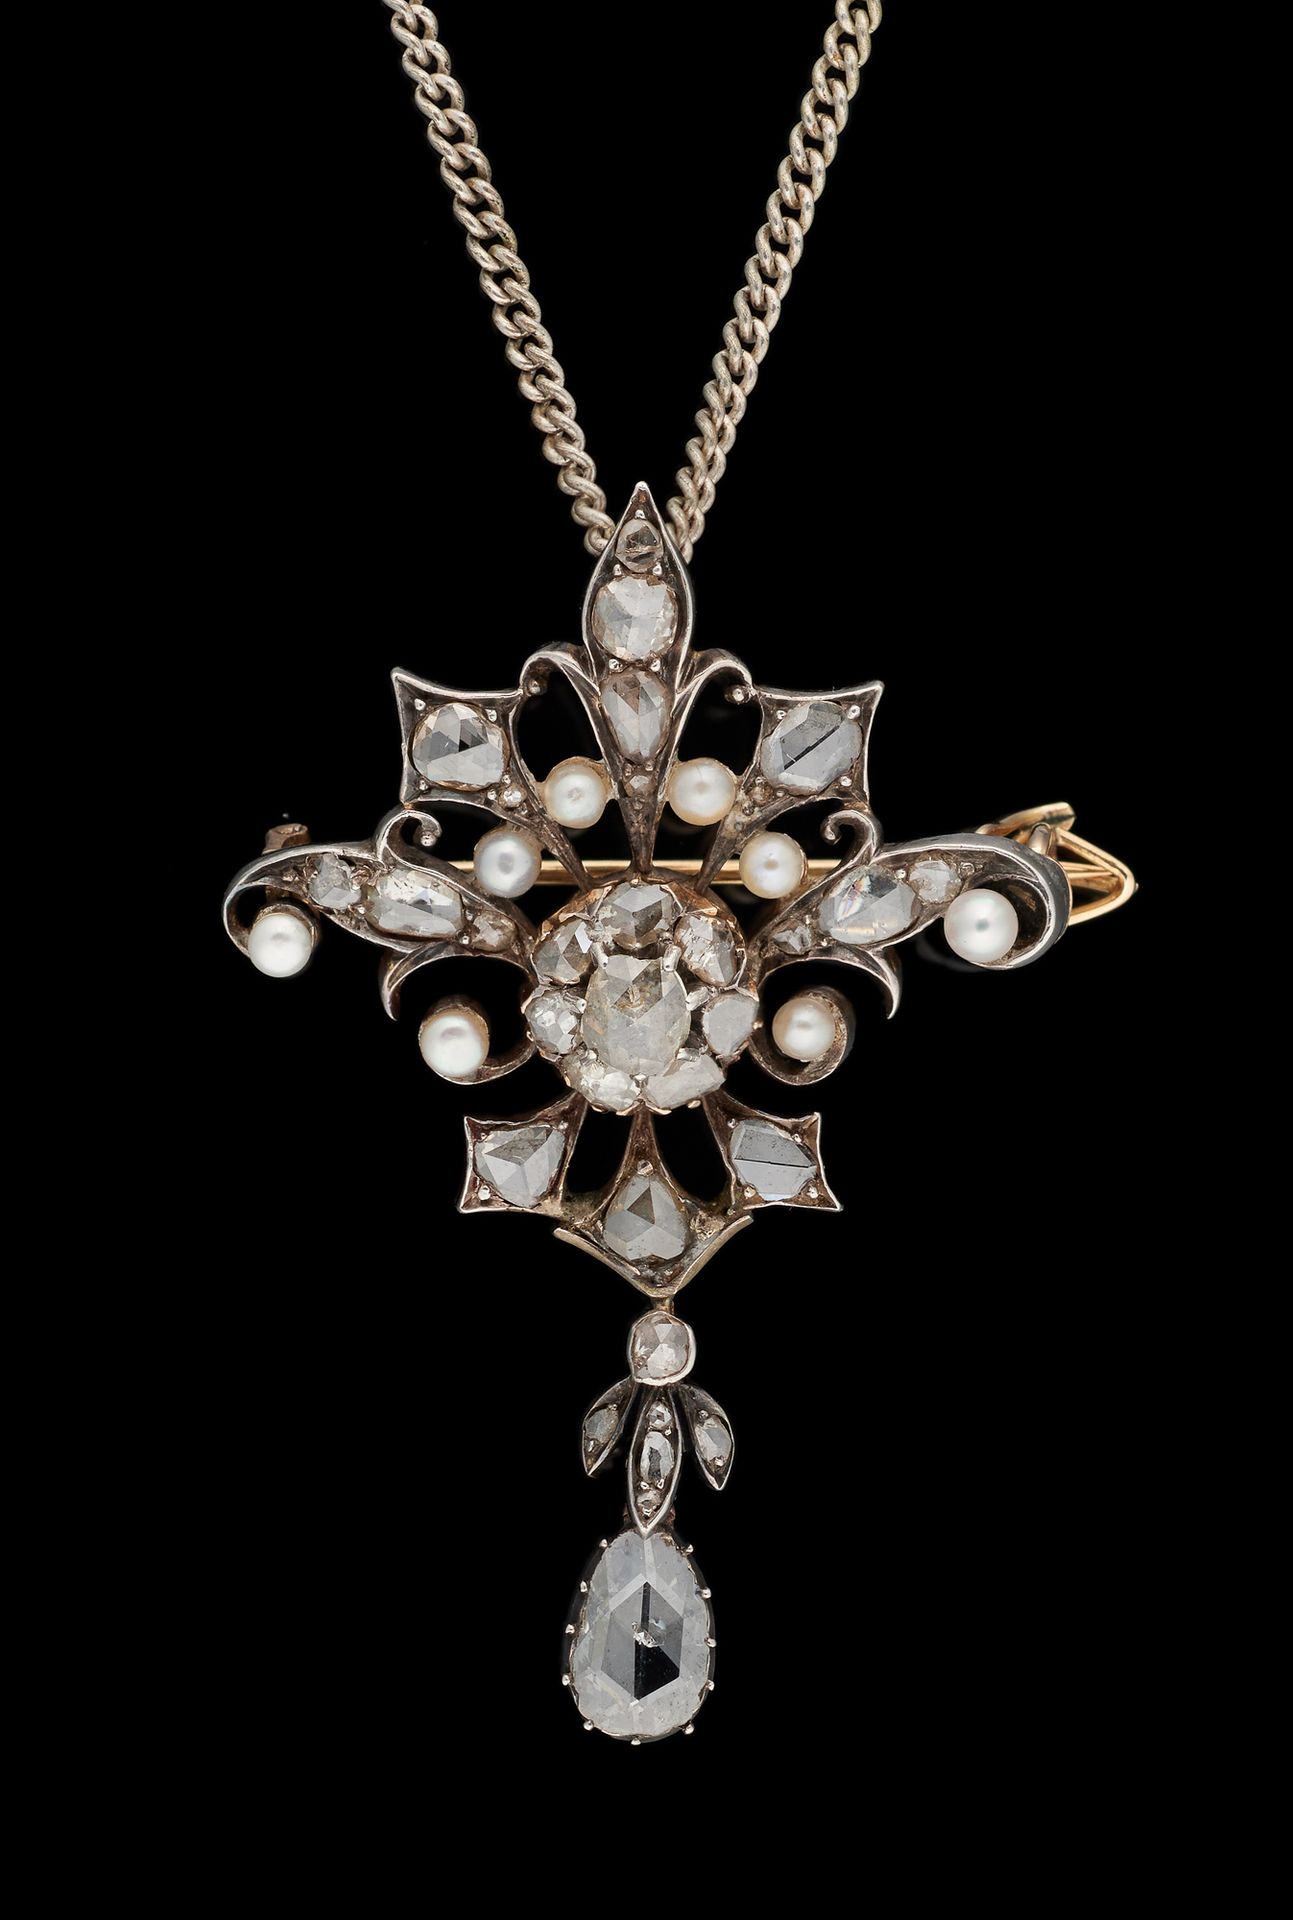 Joaillerie. Jewel: Pendant necklace decorated with pink diamonds and pearls.

Si&hellip;